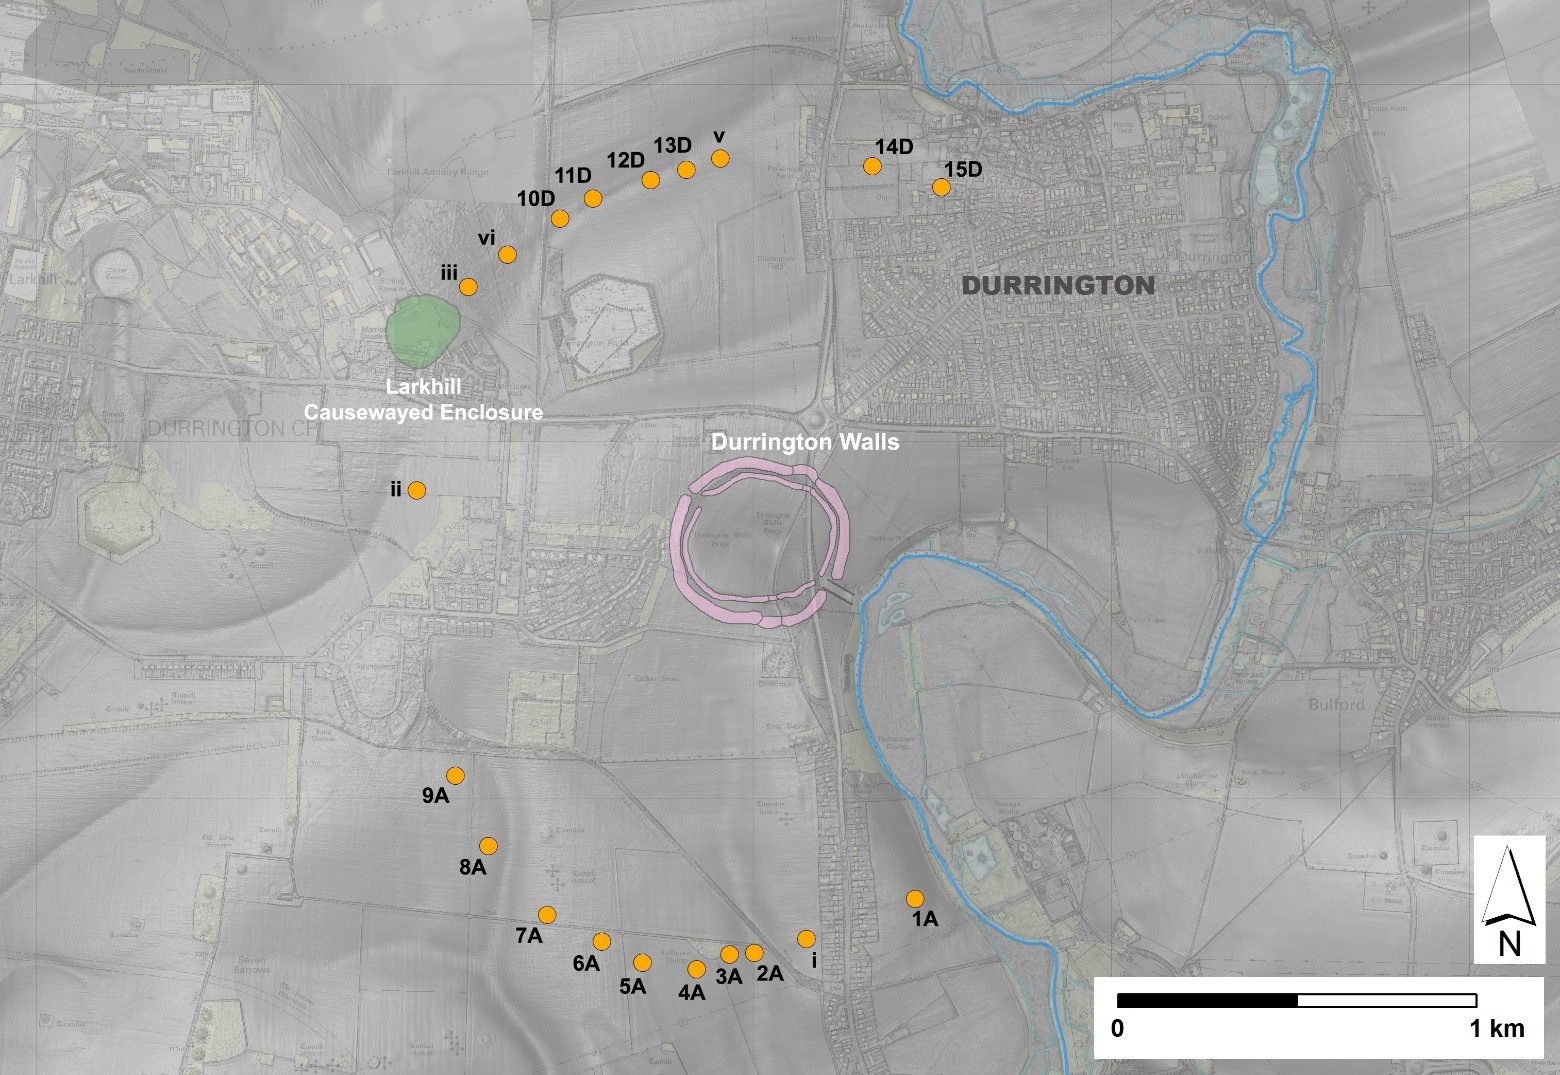 The distribution of underground pits from above. Credit: Wild Blue Media/Channel 5/University of Bradford